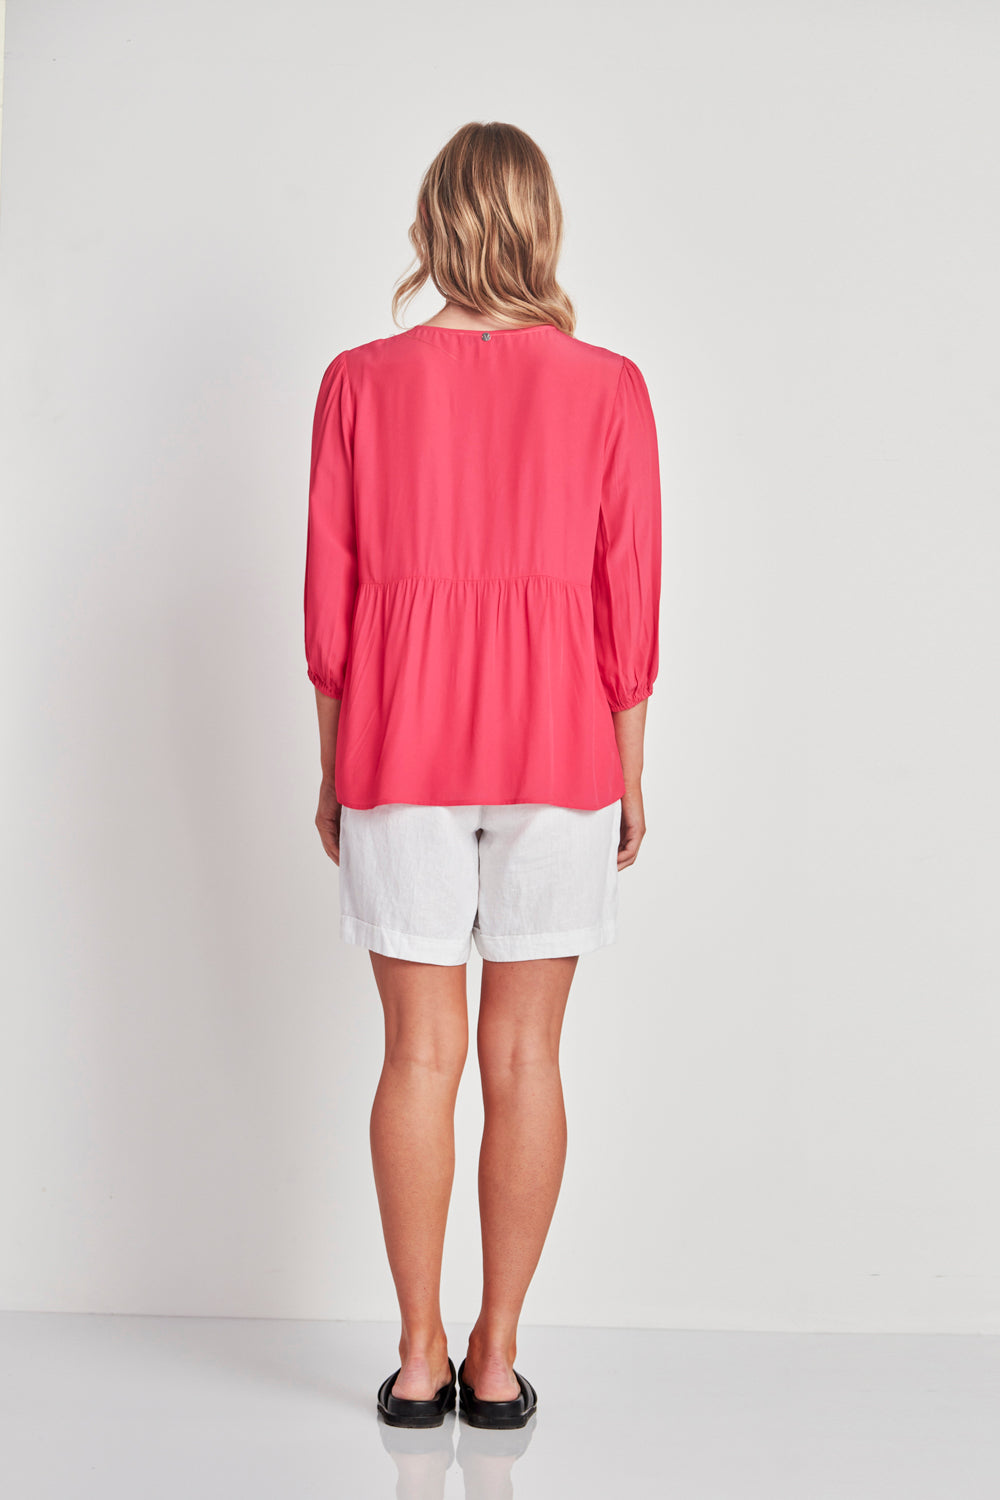 Scout Top - Bright Pink - Top VERGE